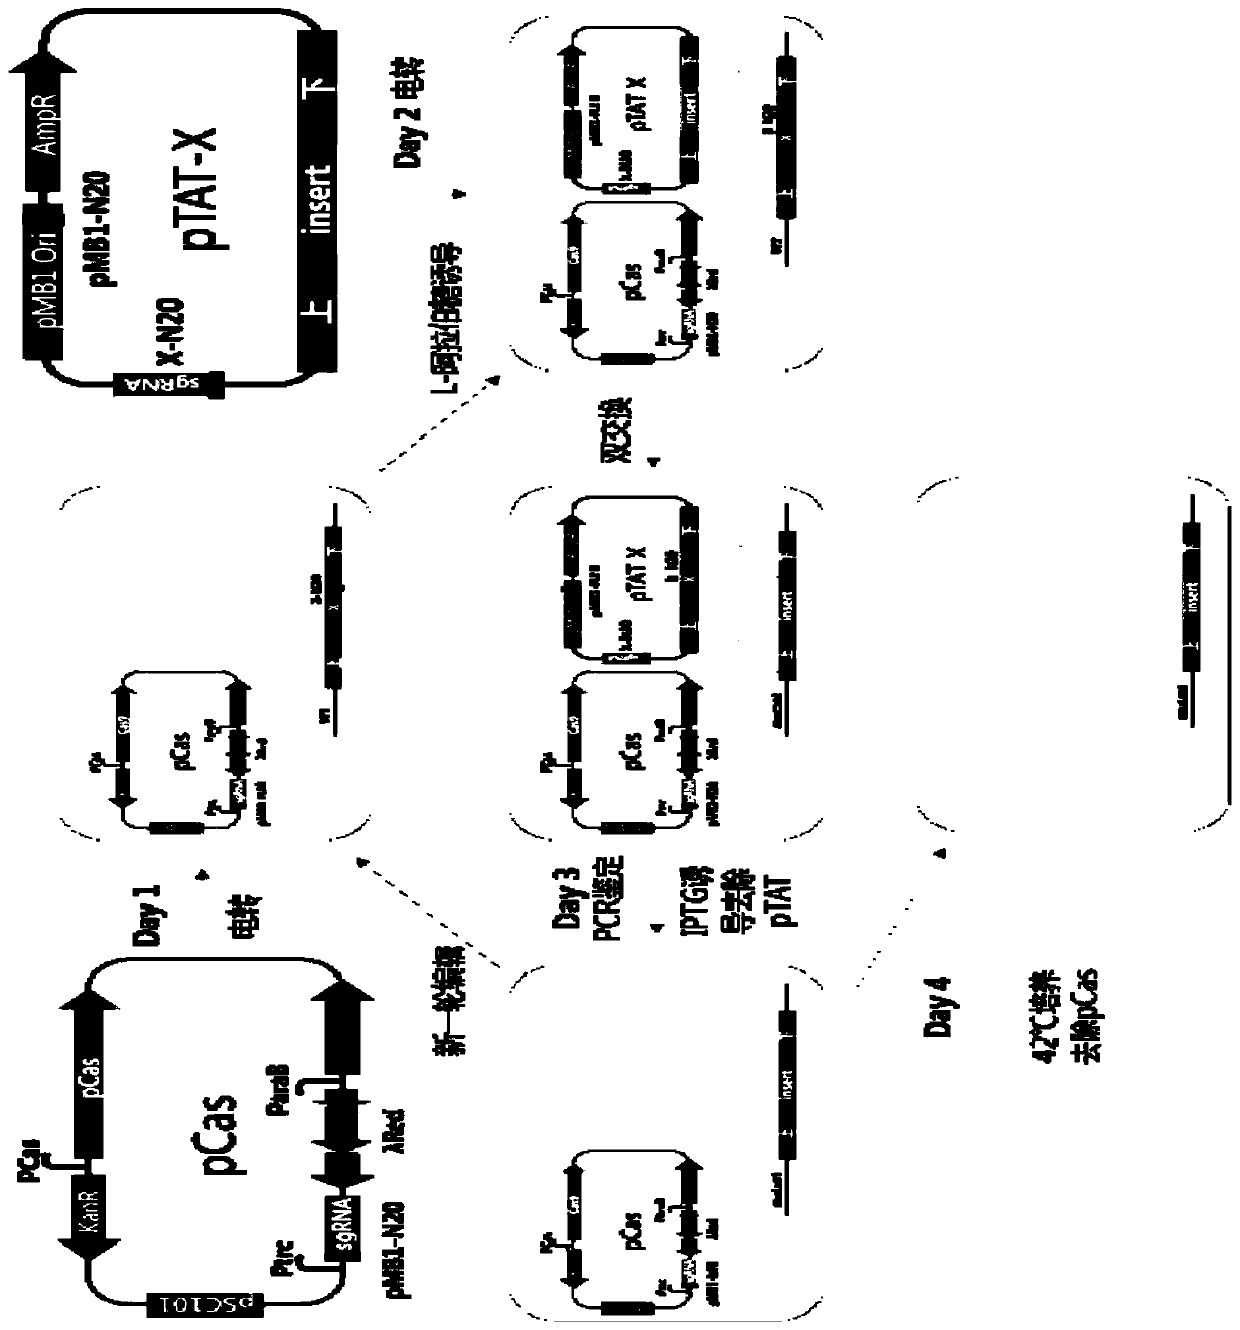 Salmonella efficient traceless gene editing system and application thereof